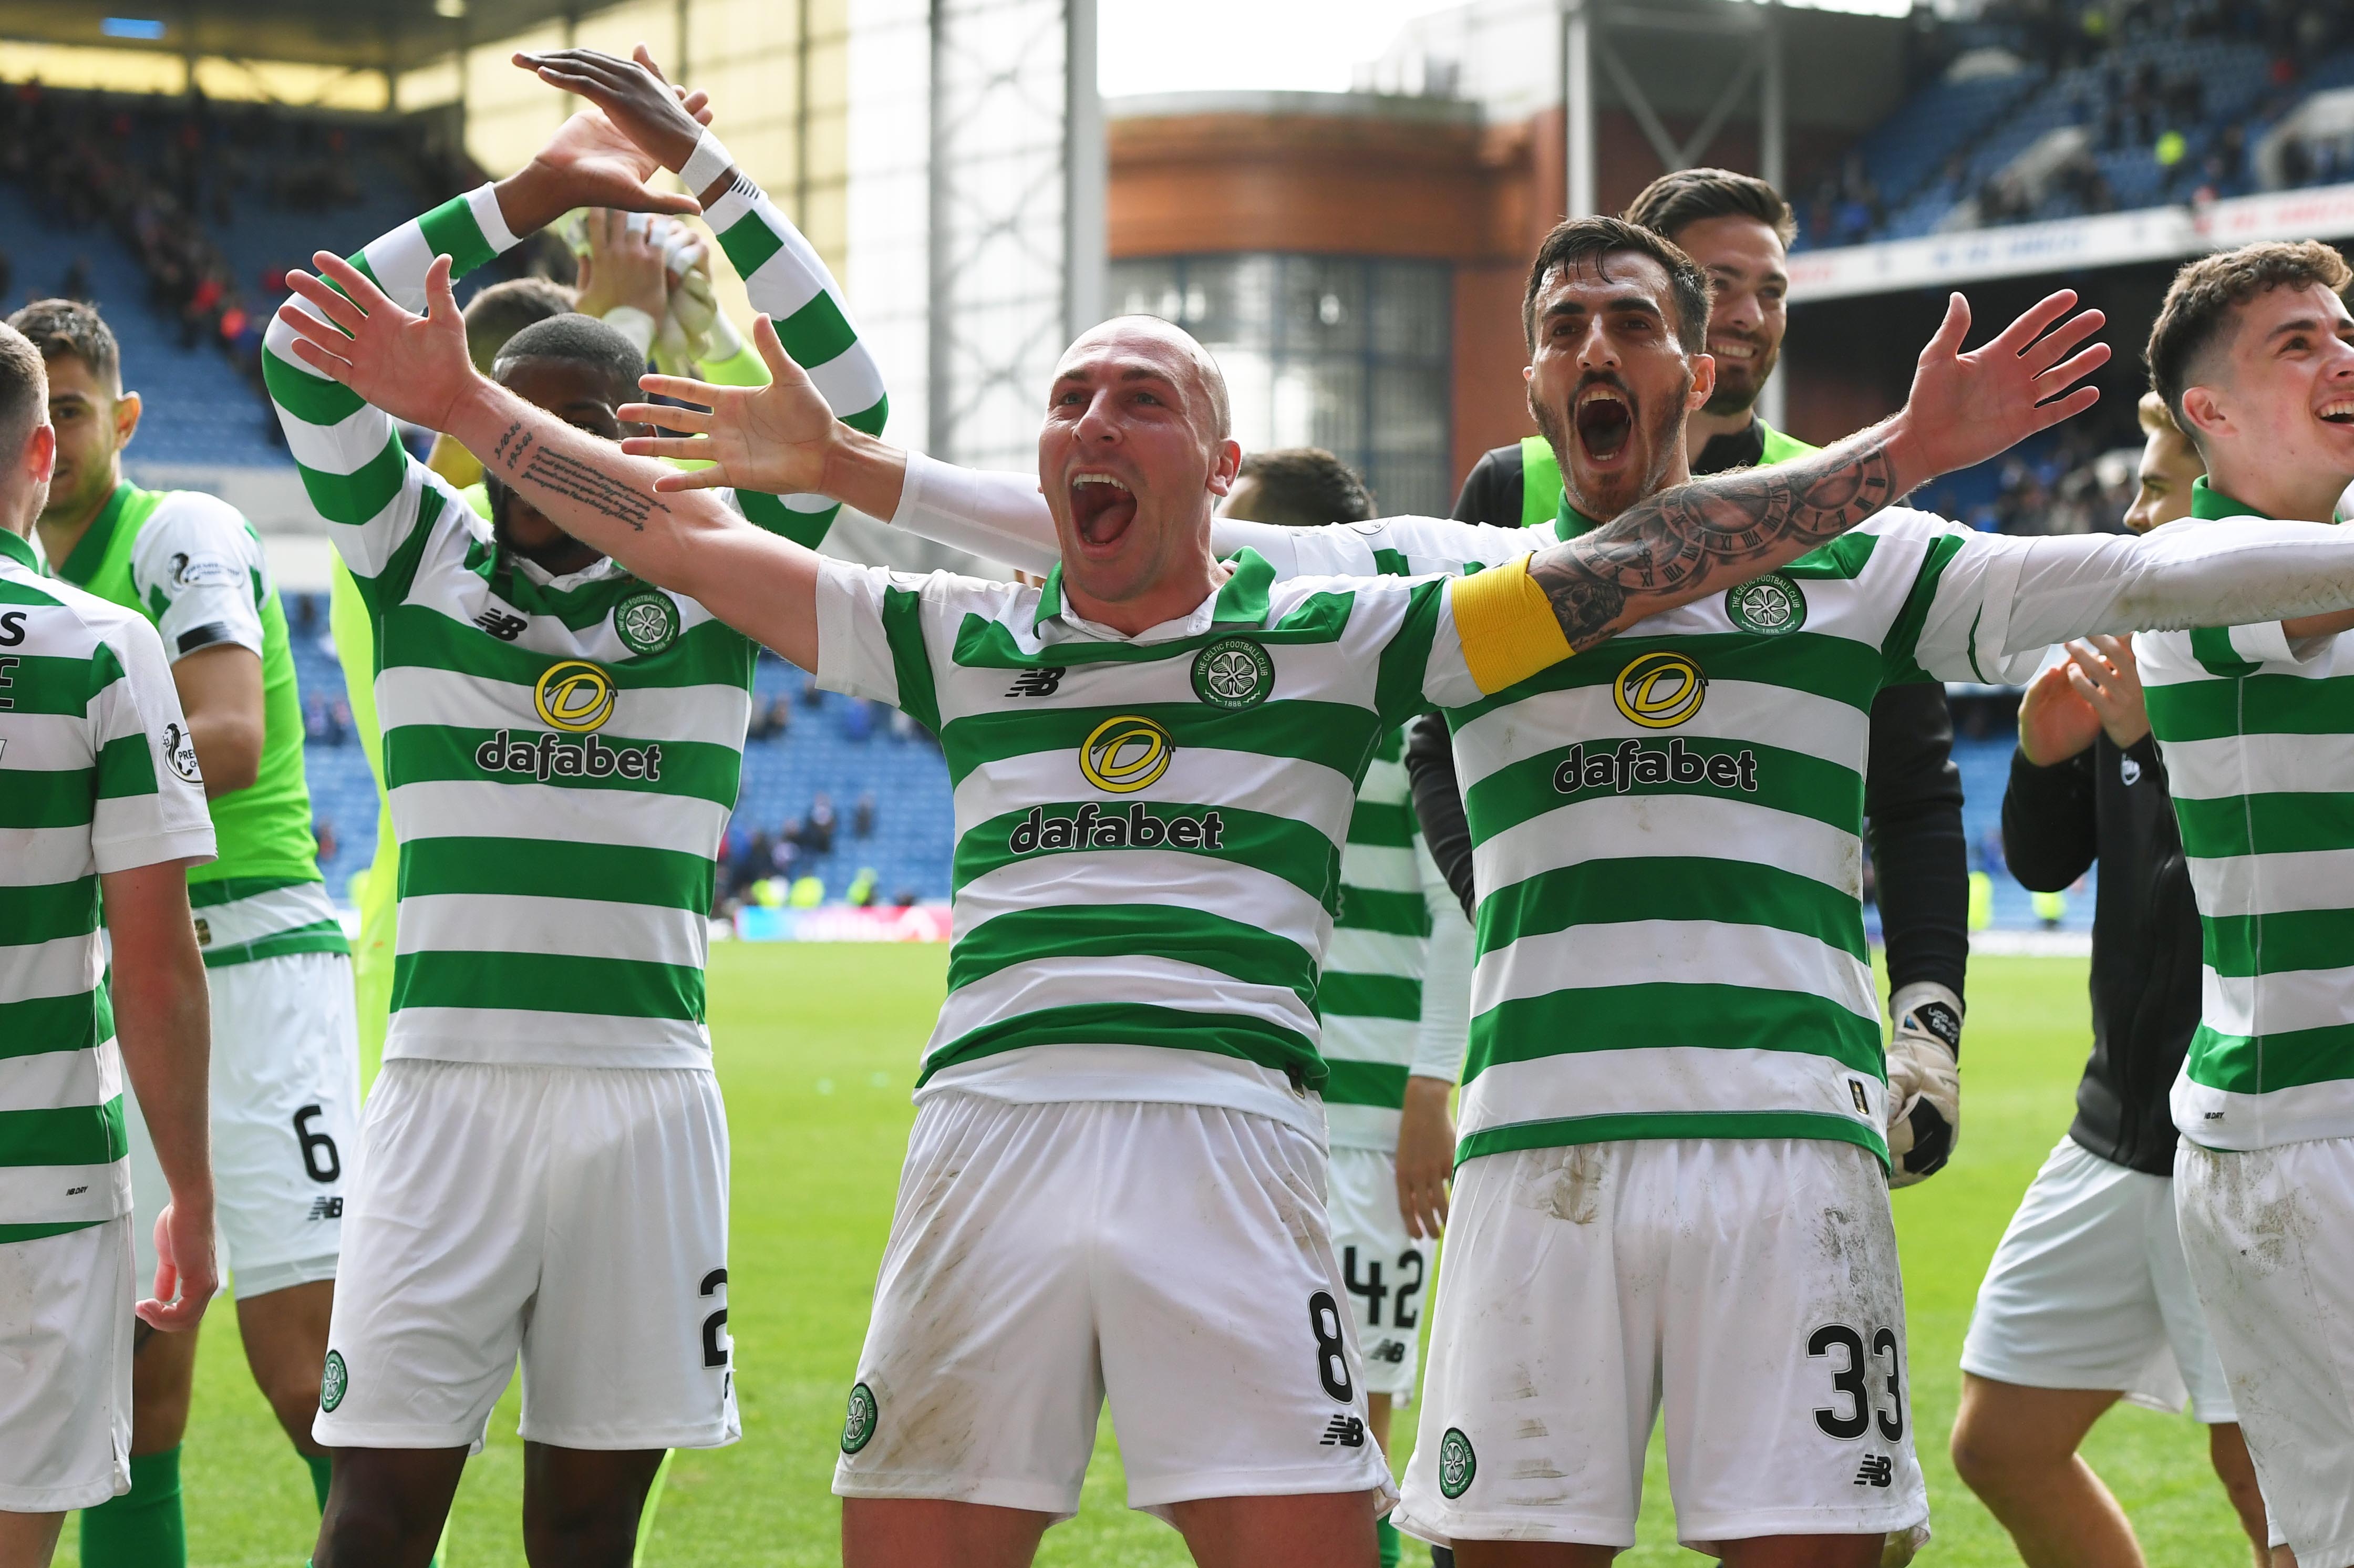 Celtic captain Scott Brown and his team-mates celebrate after beating Rangers 2-0 at Ibrox last Sunday